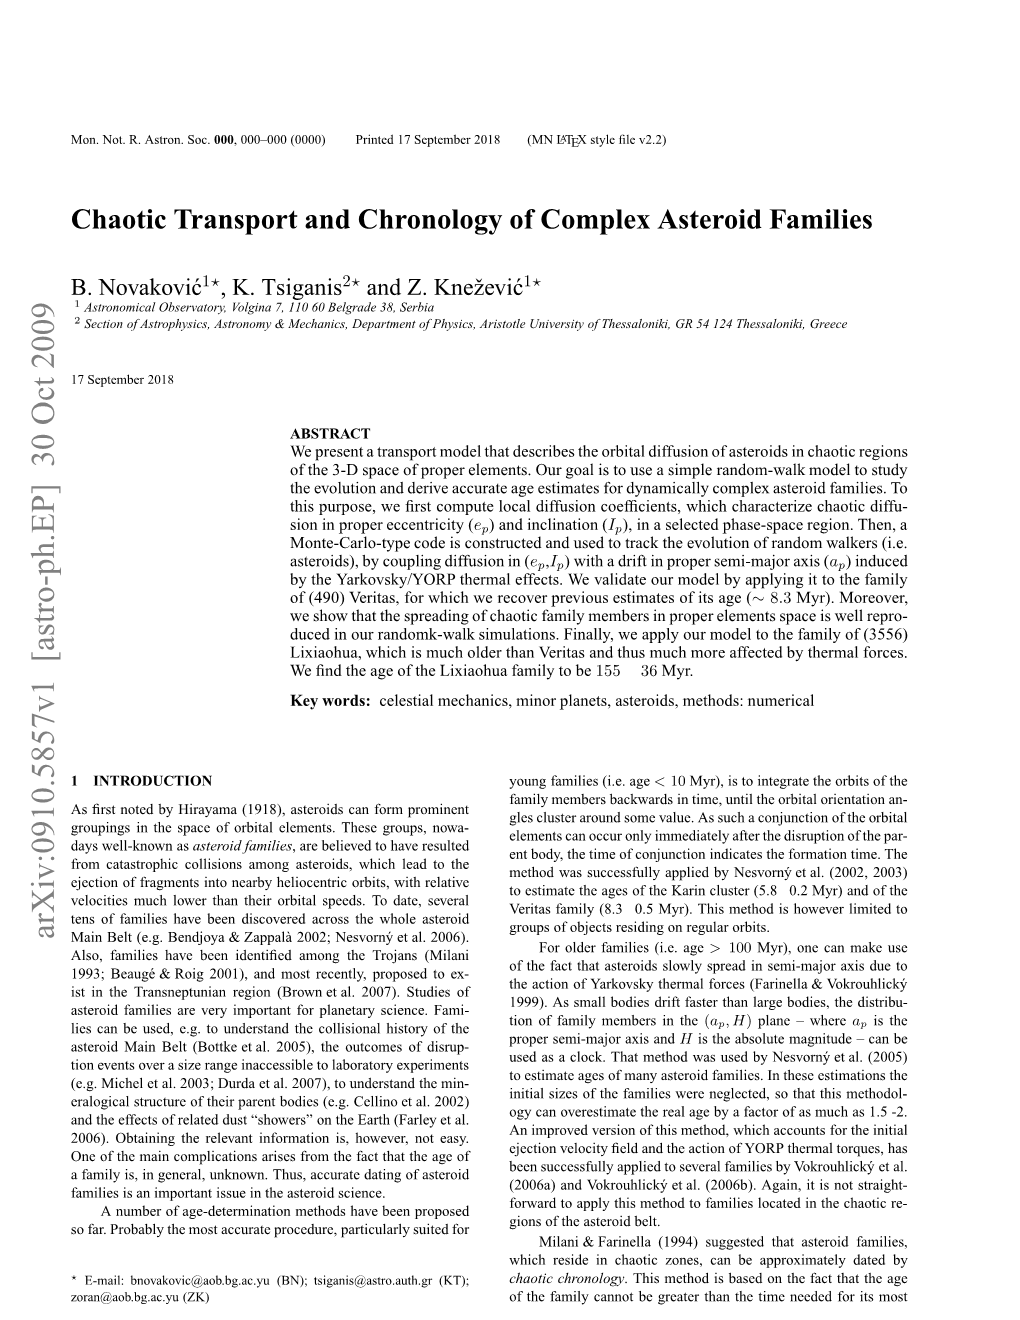 Chaotic Transport and Chronology of Complex Asteroid Families